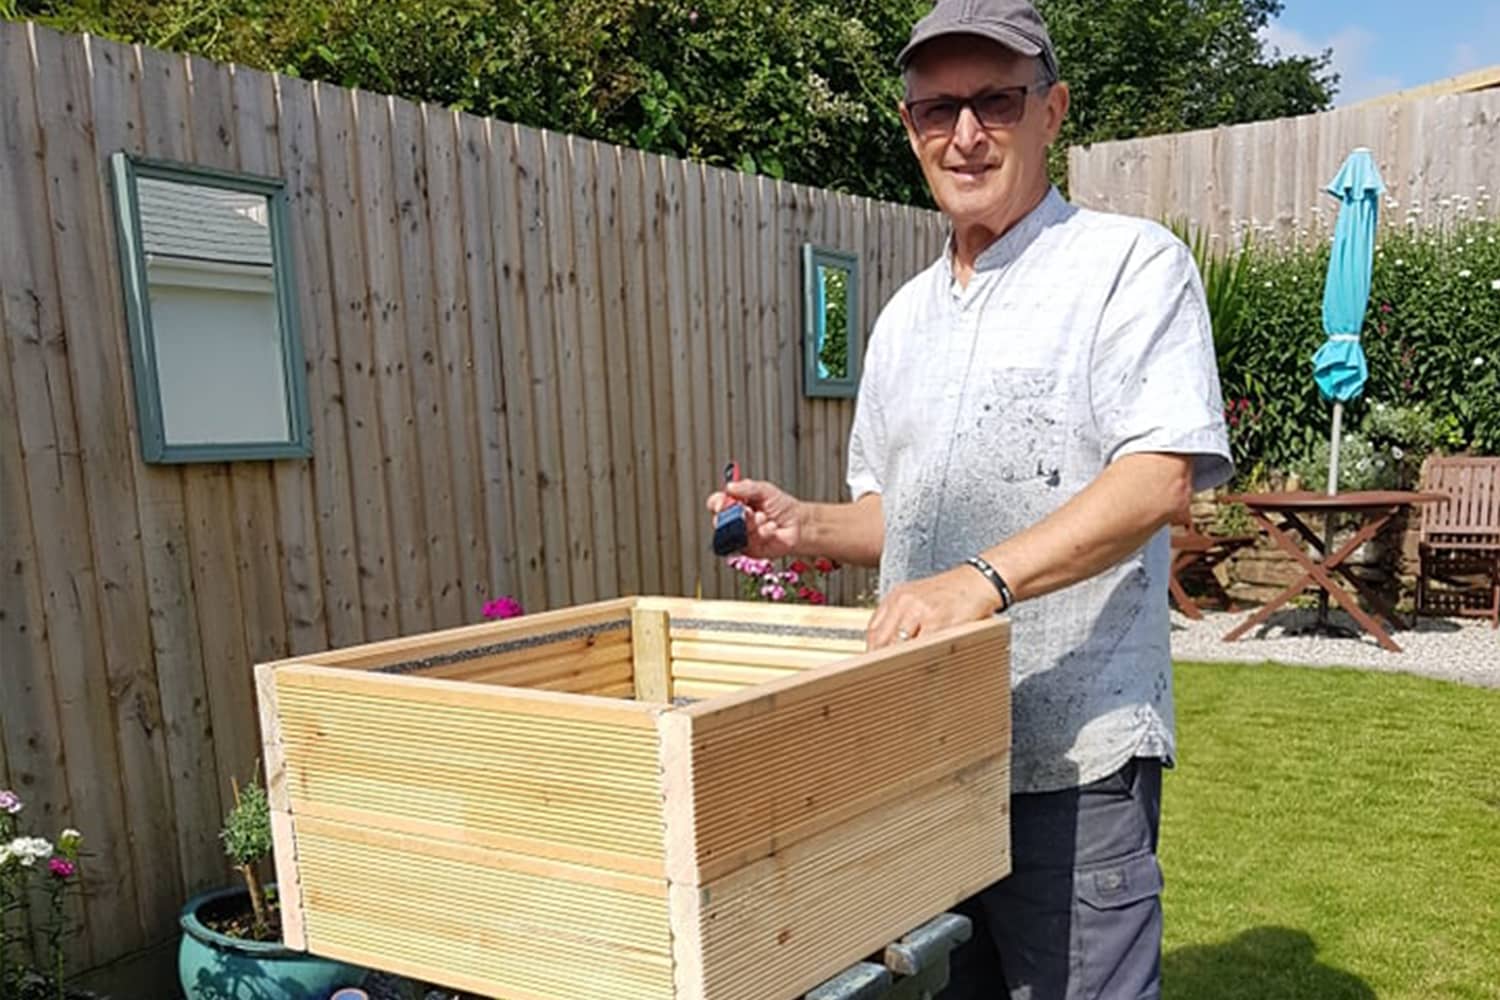 Gripsure non-slip timber deck boards upcycled into garden planters for charity